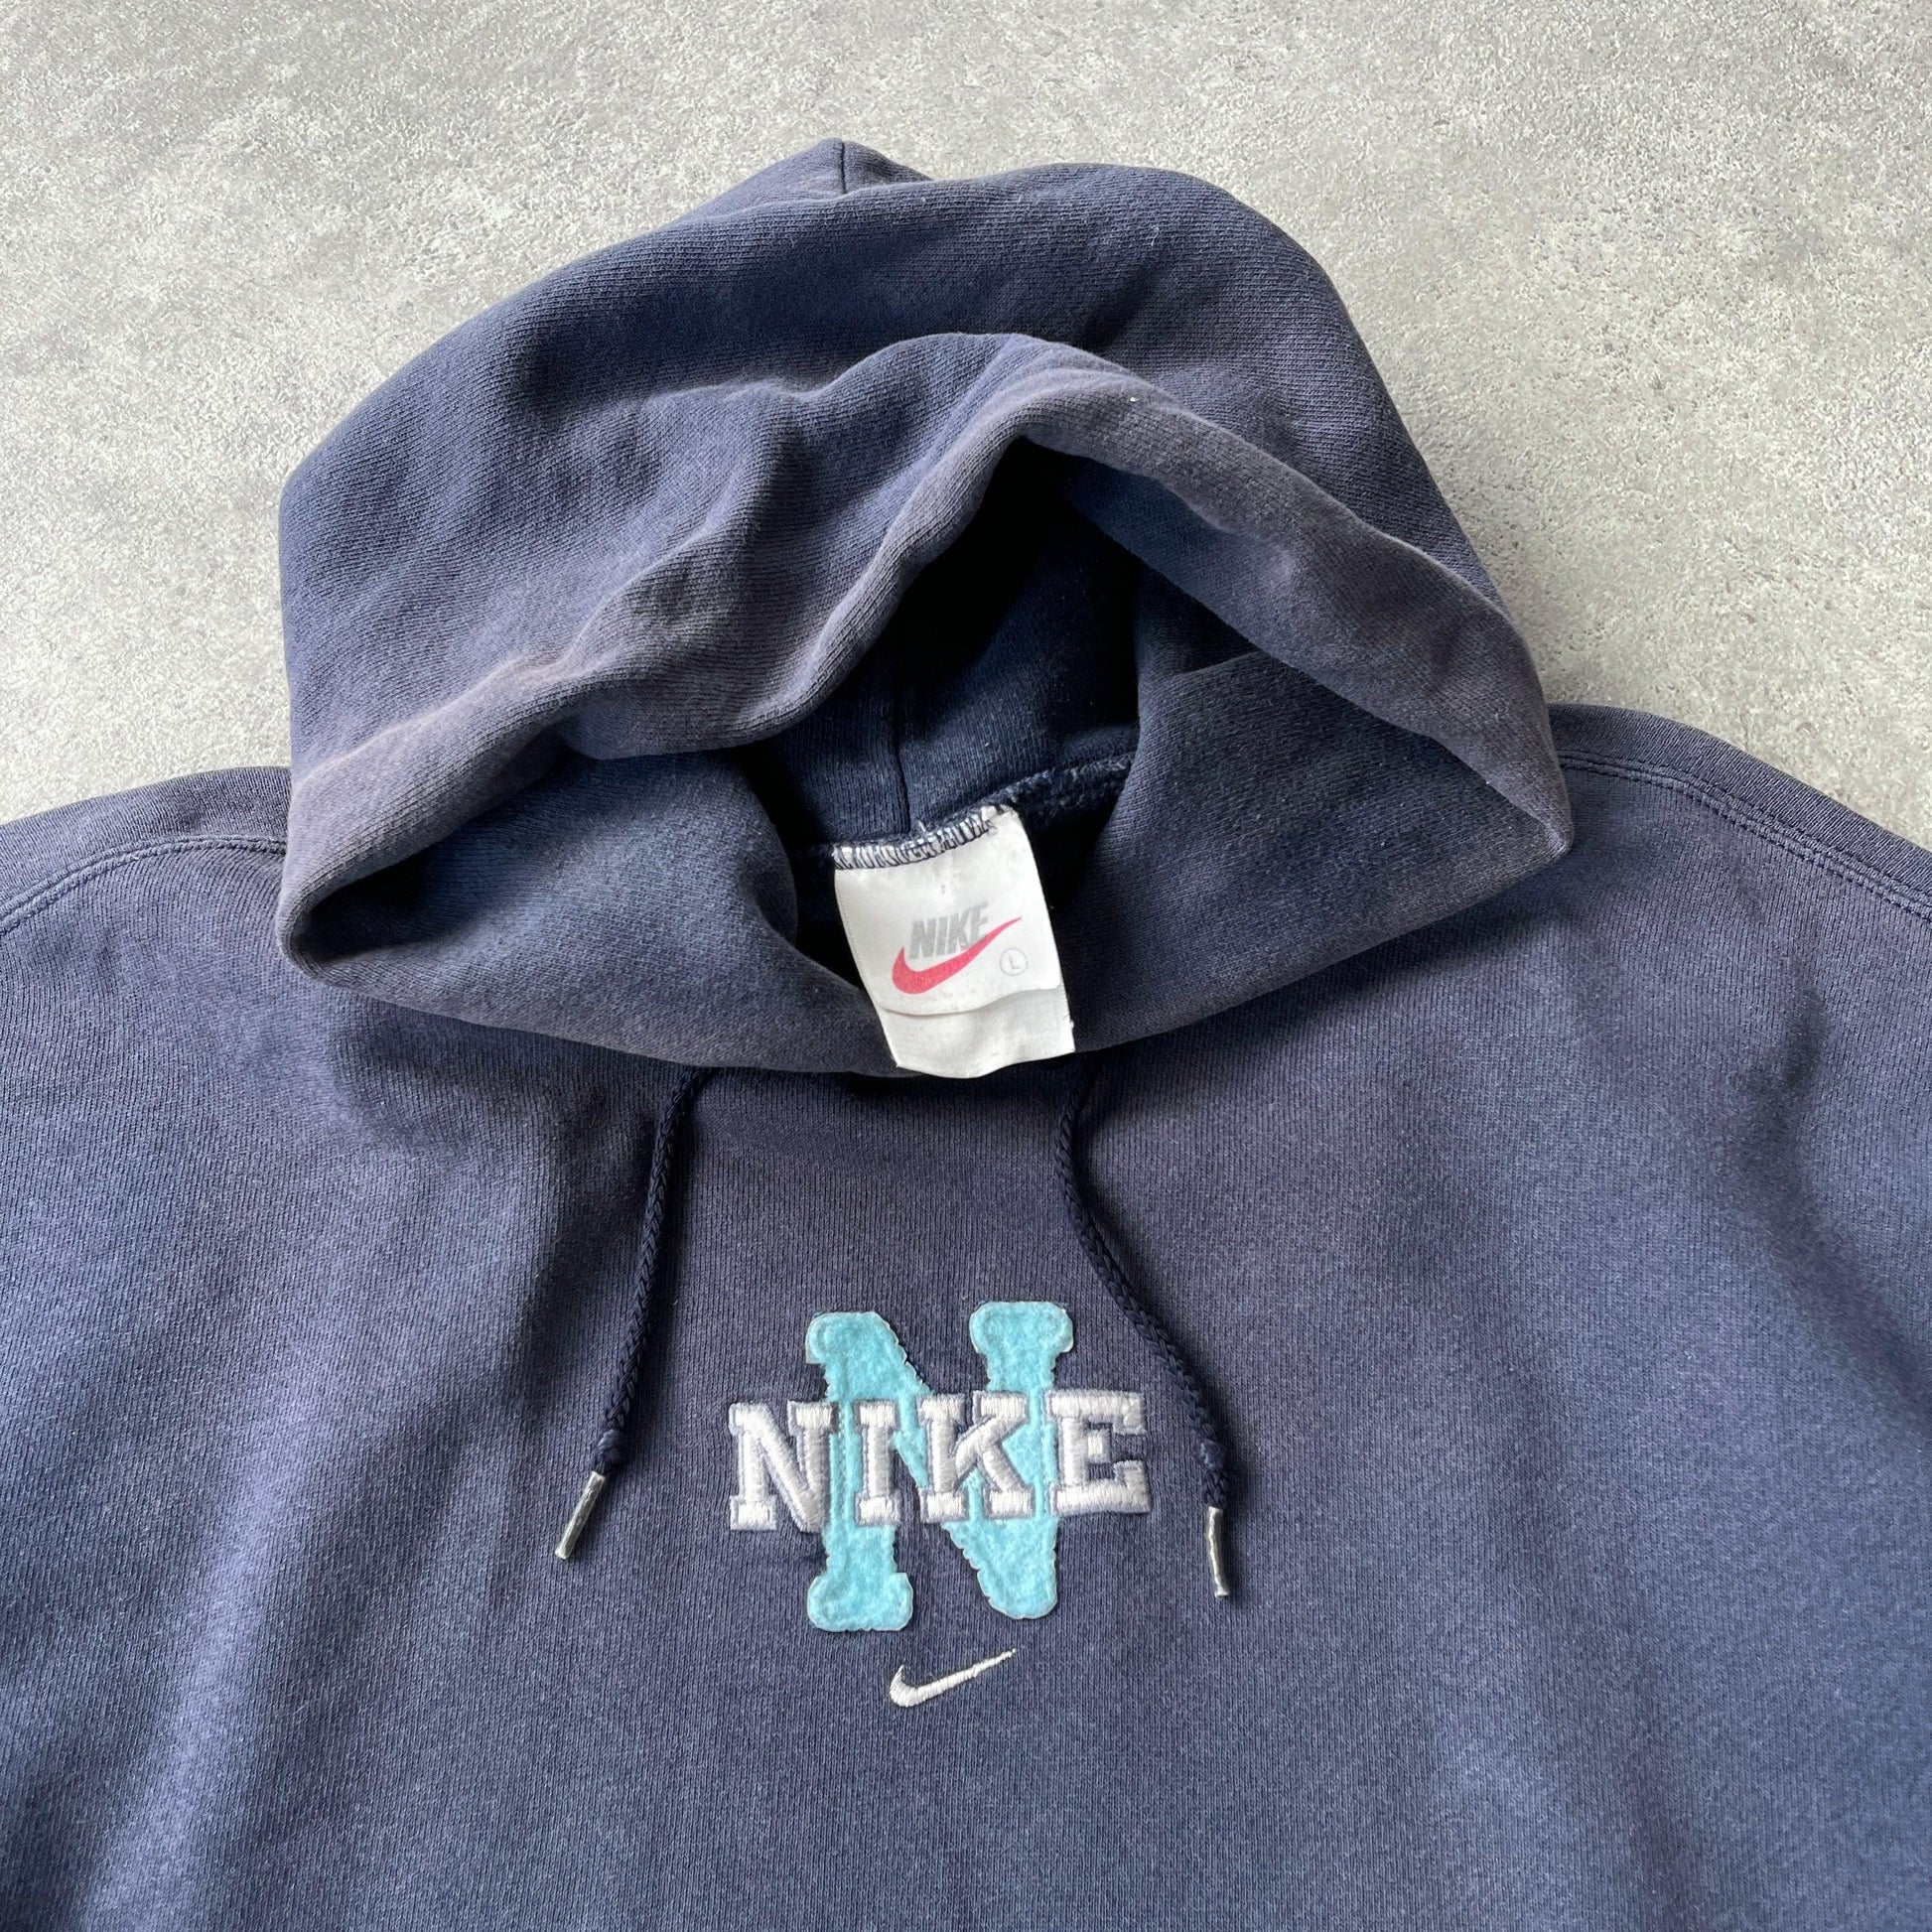 Nike RARE 1990s heavyweight embroidered hoodie (L) - Known Source